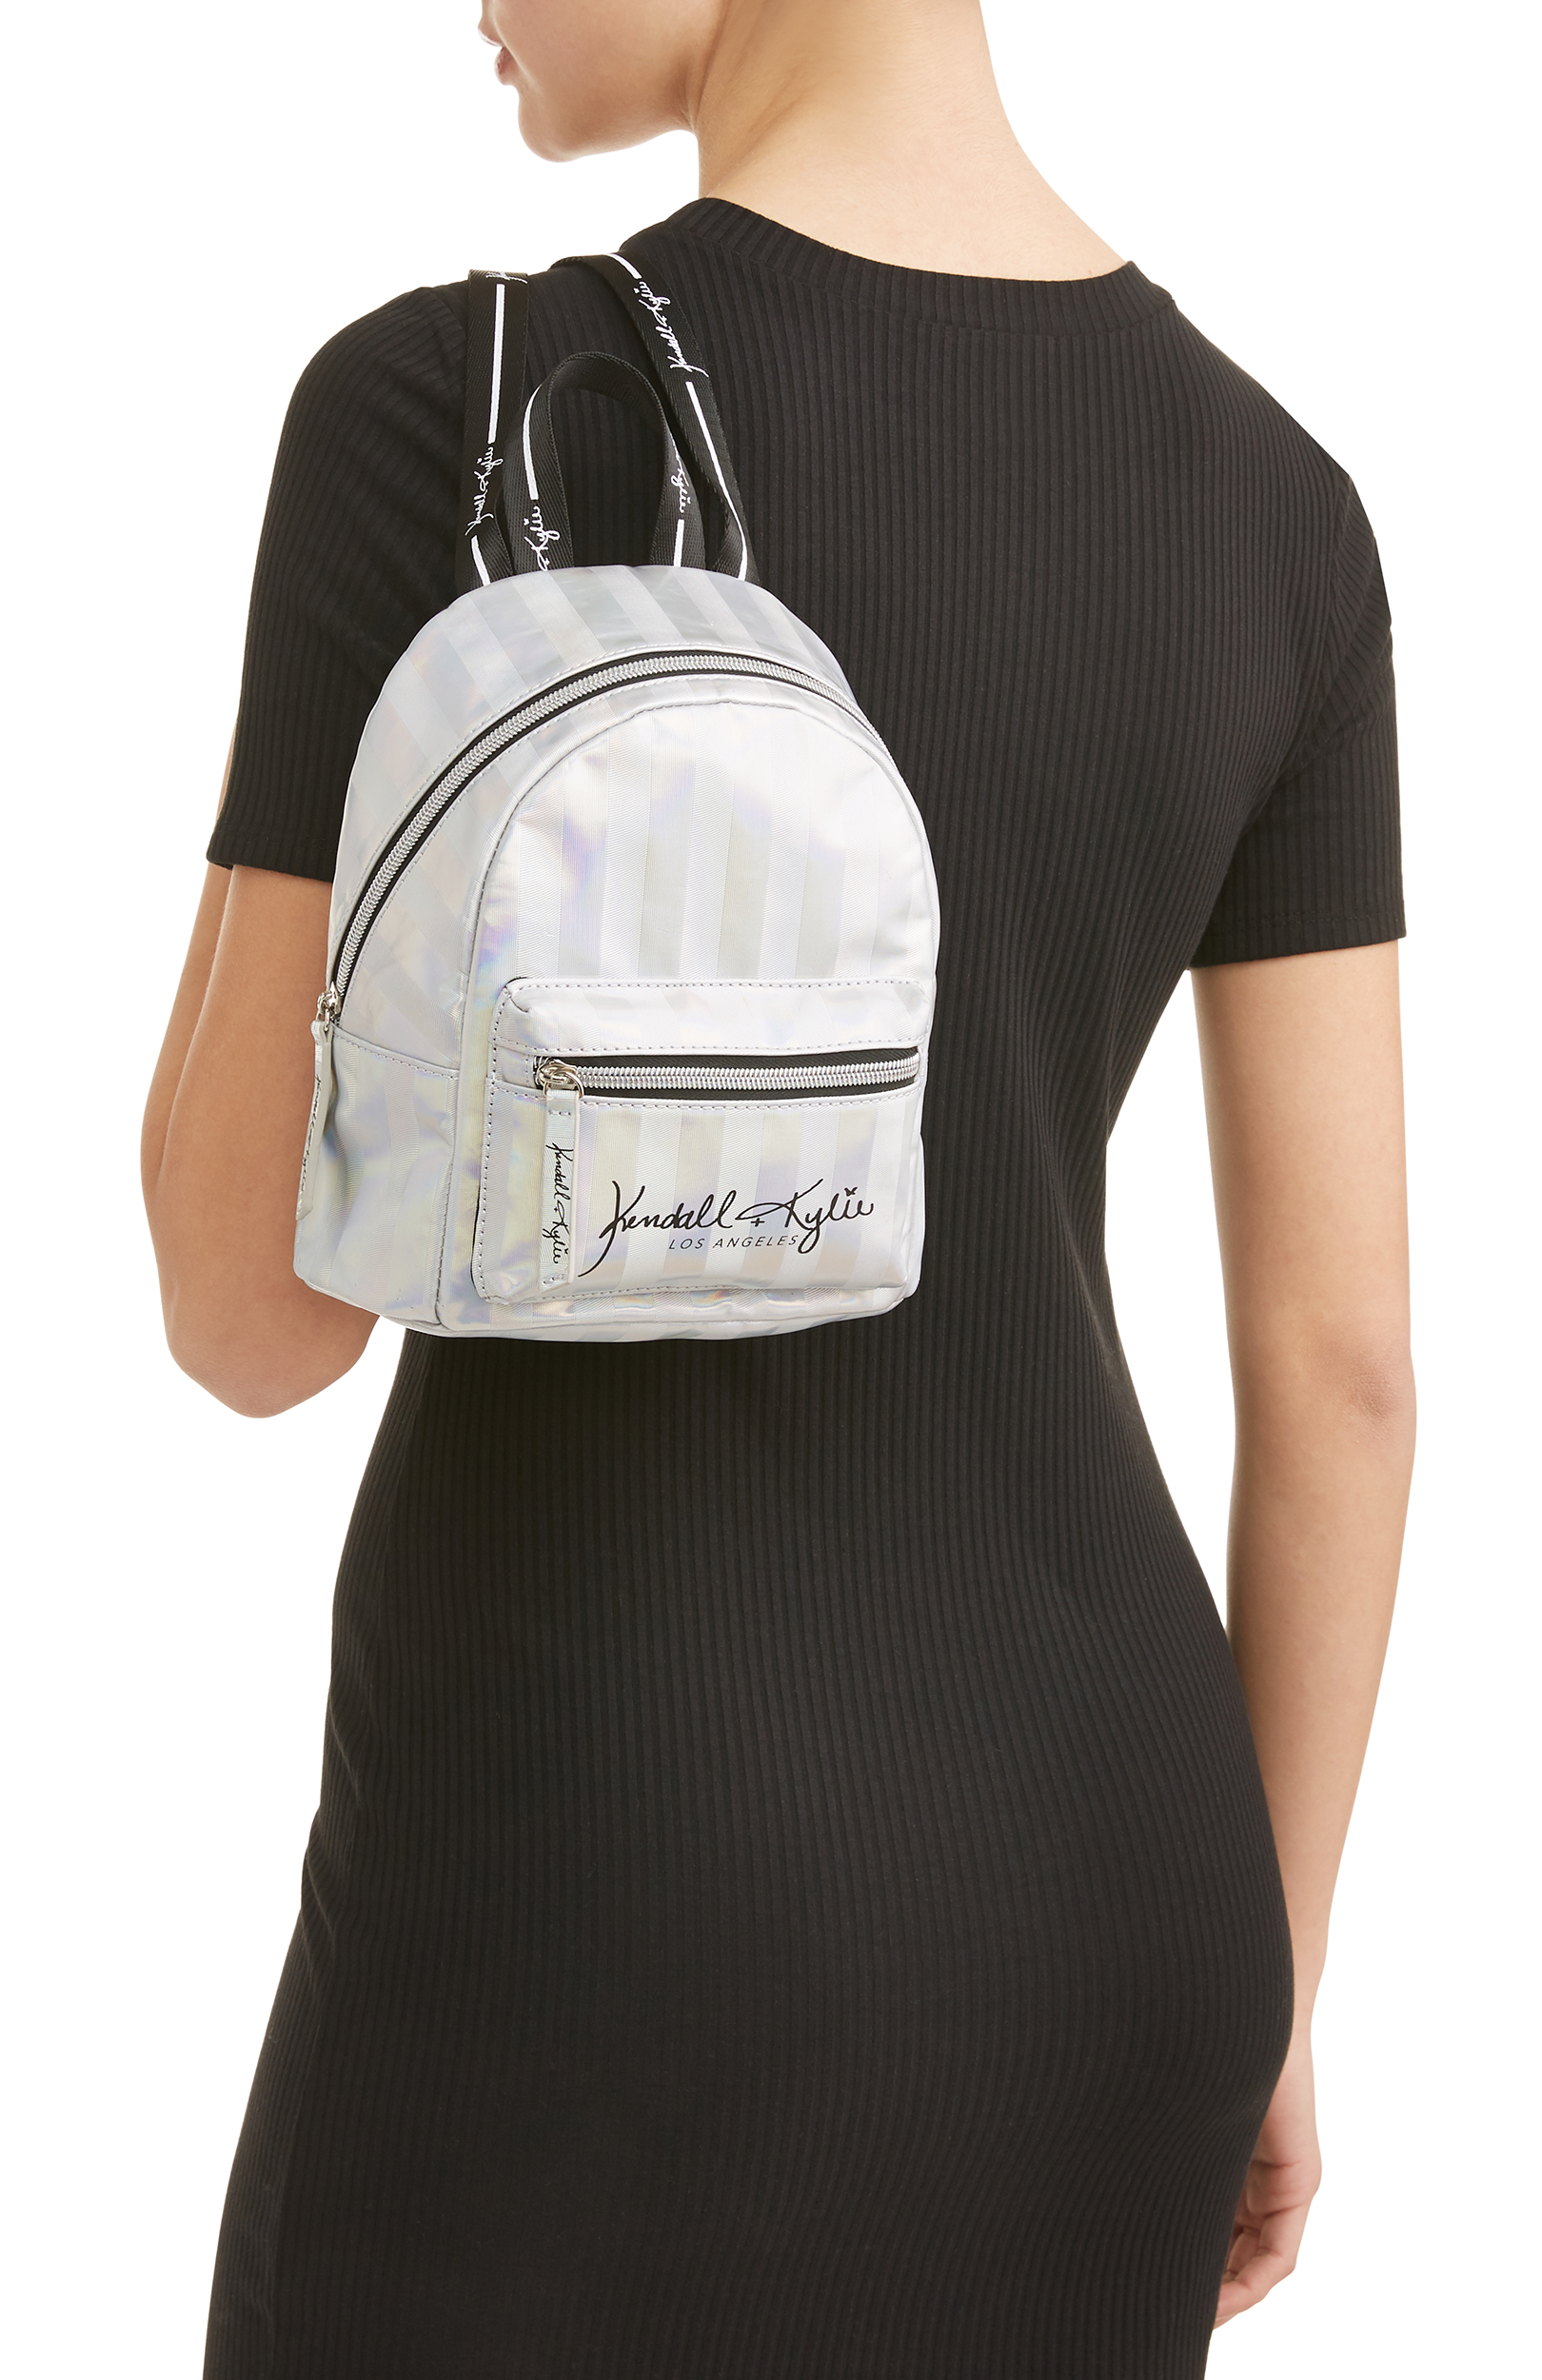 Kendall + Kylie for Walmart Iridescent Mini Backpack - image 2 of 5